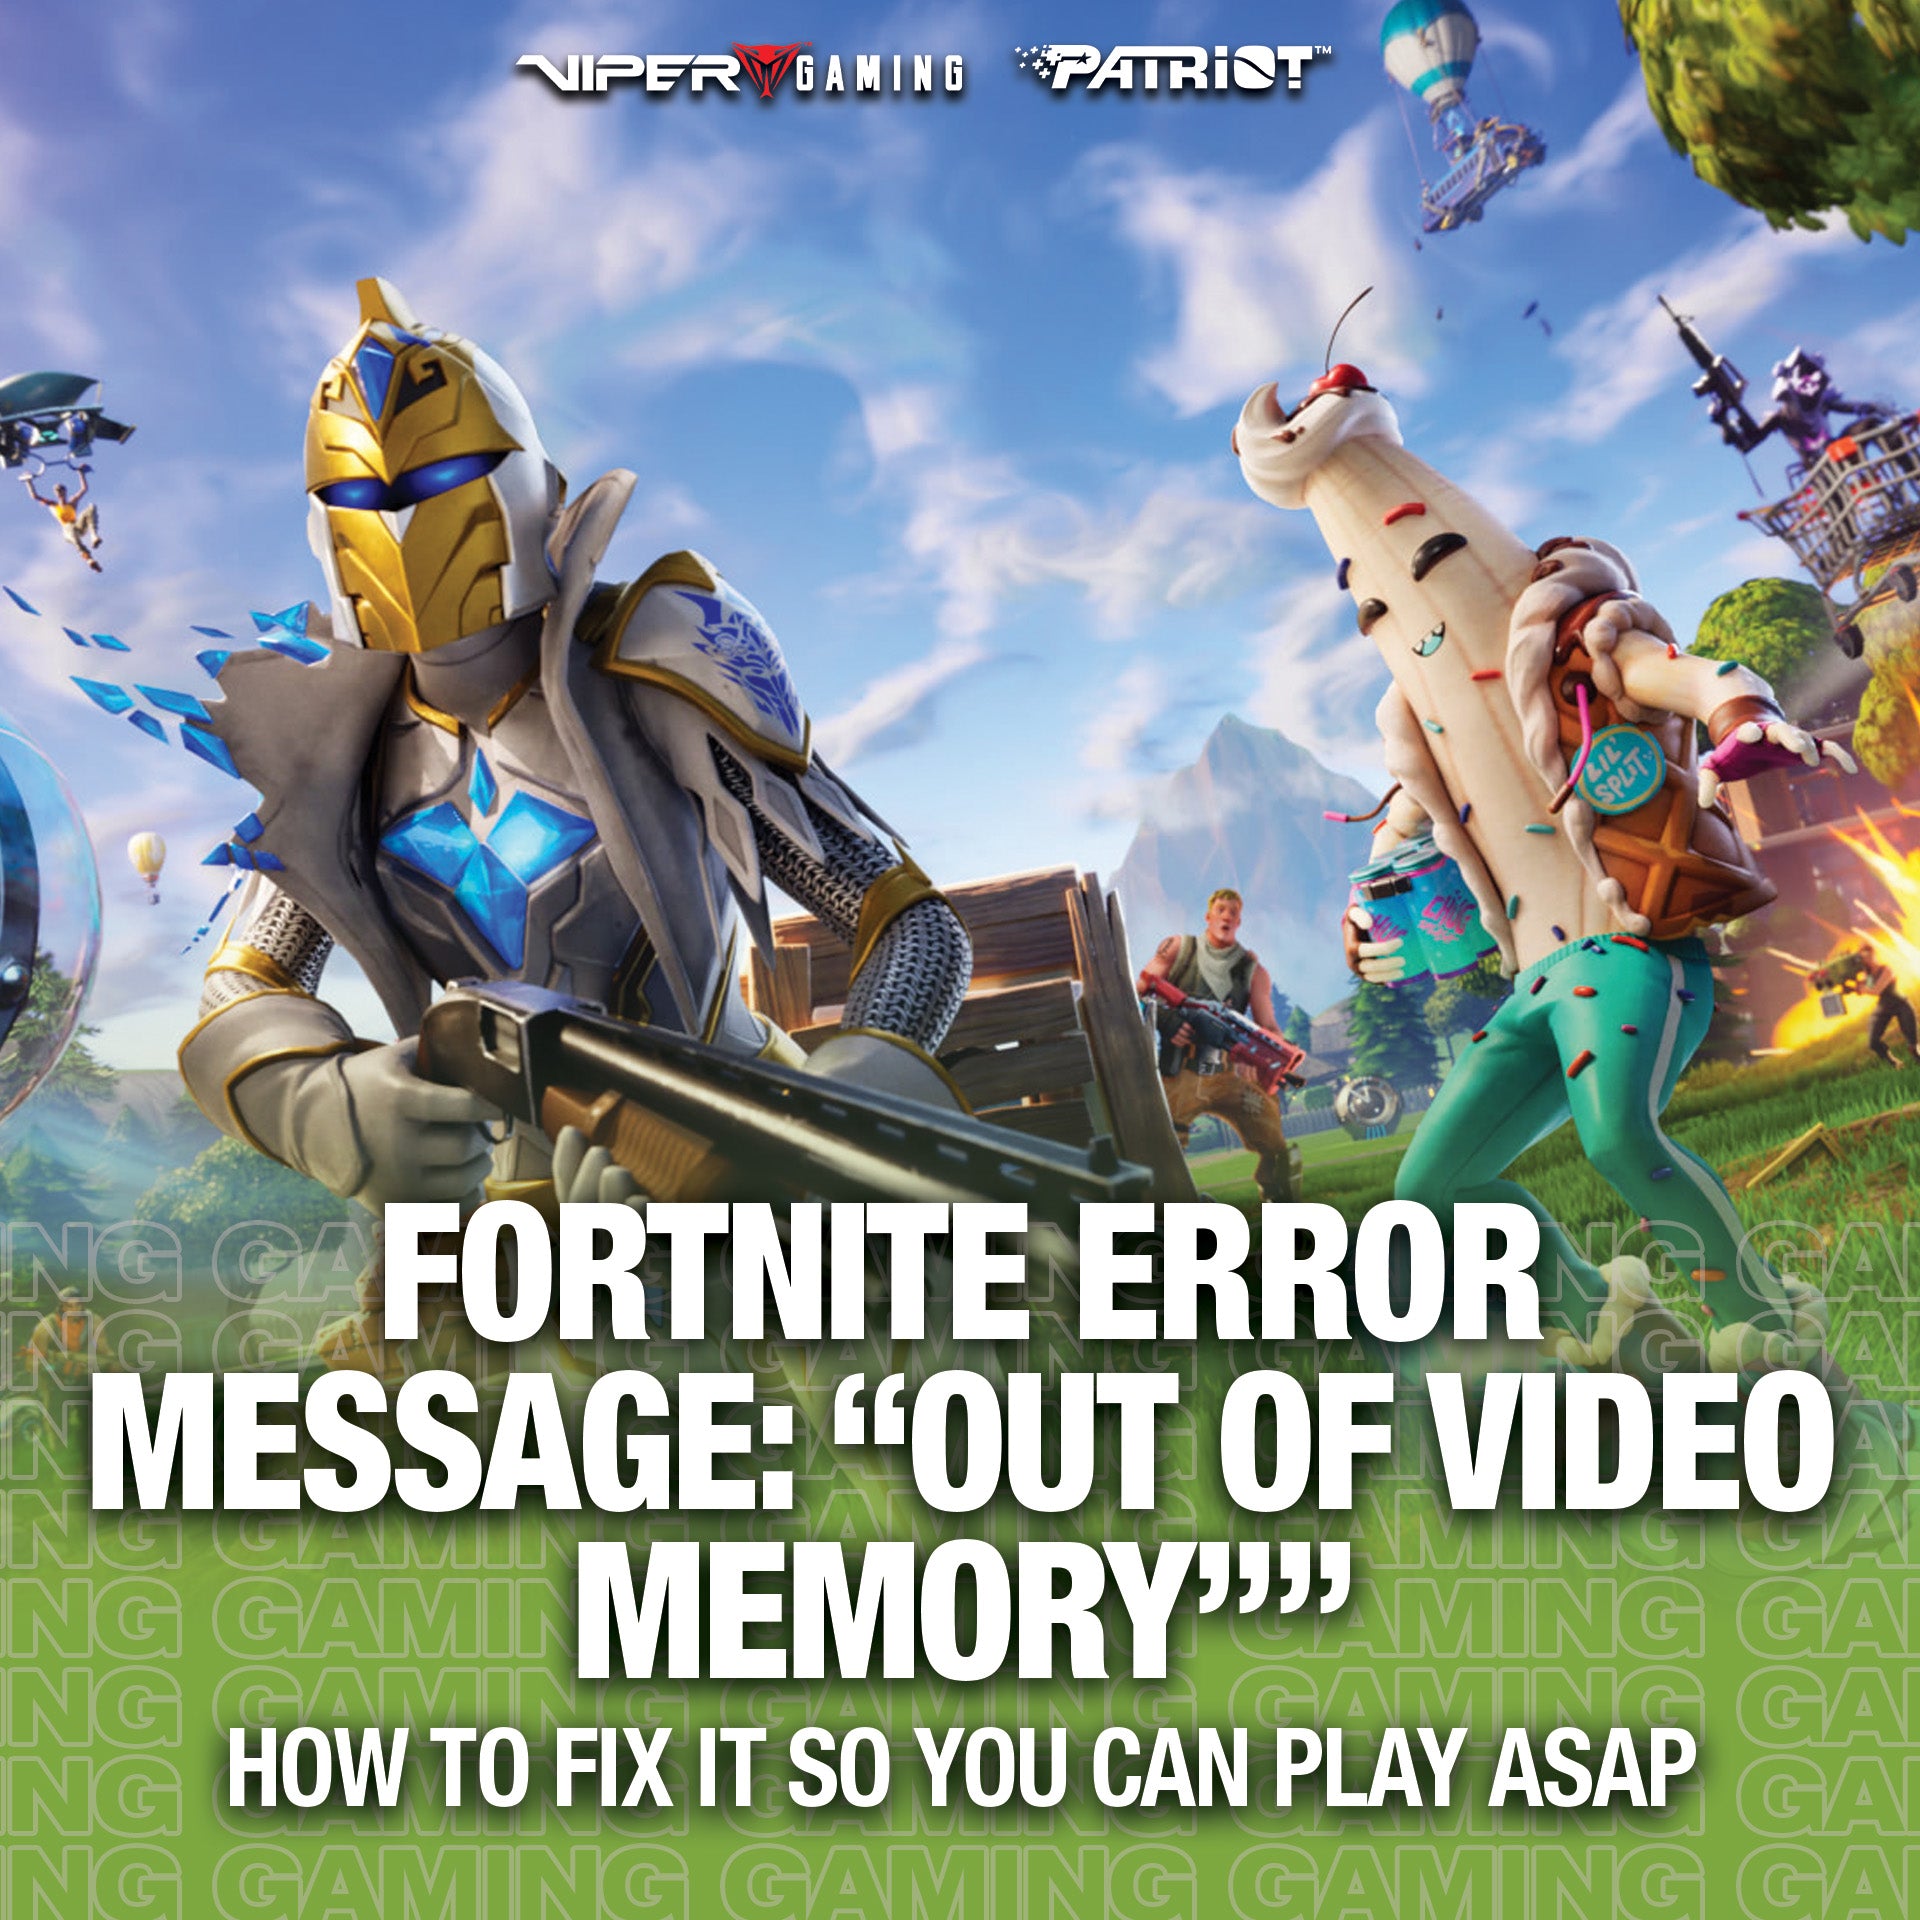 How to fix the Fortnite error message: "Out of Video Memory"